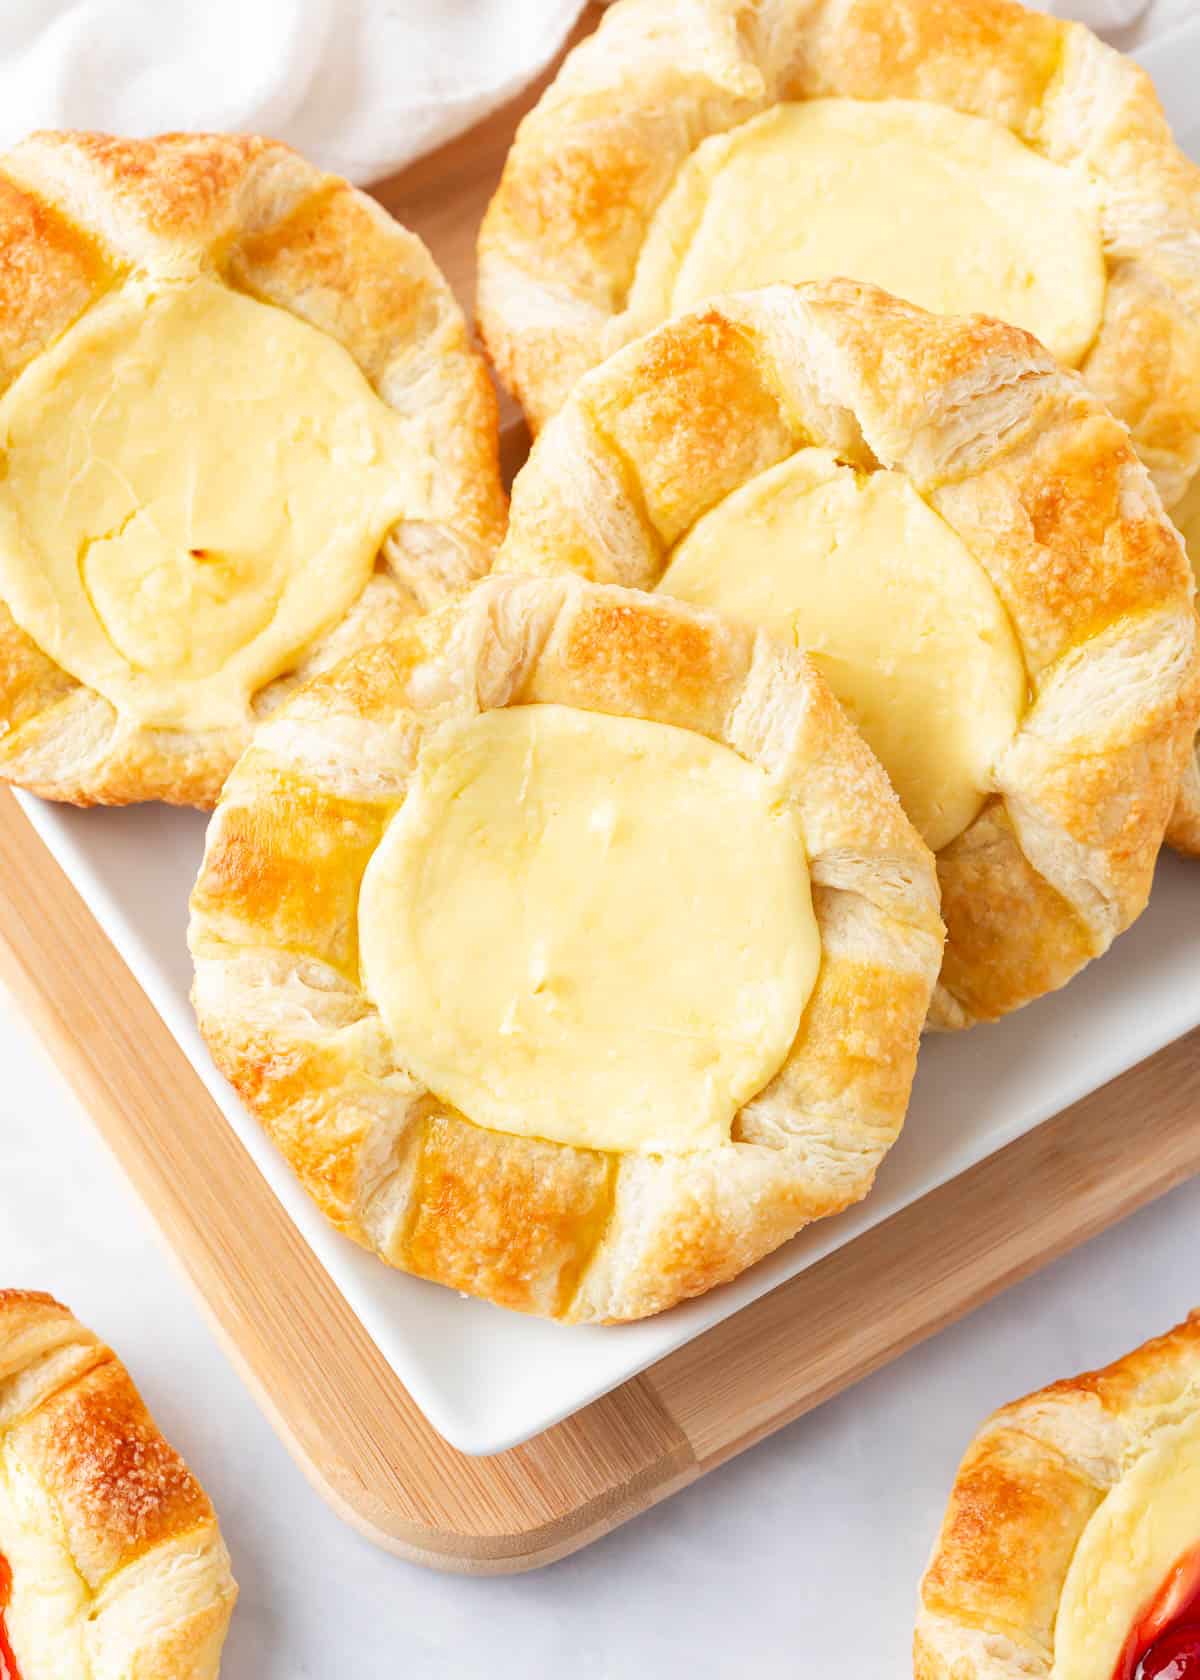 Cheese danish recipe on a plate.